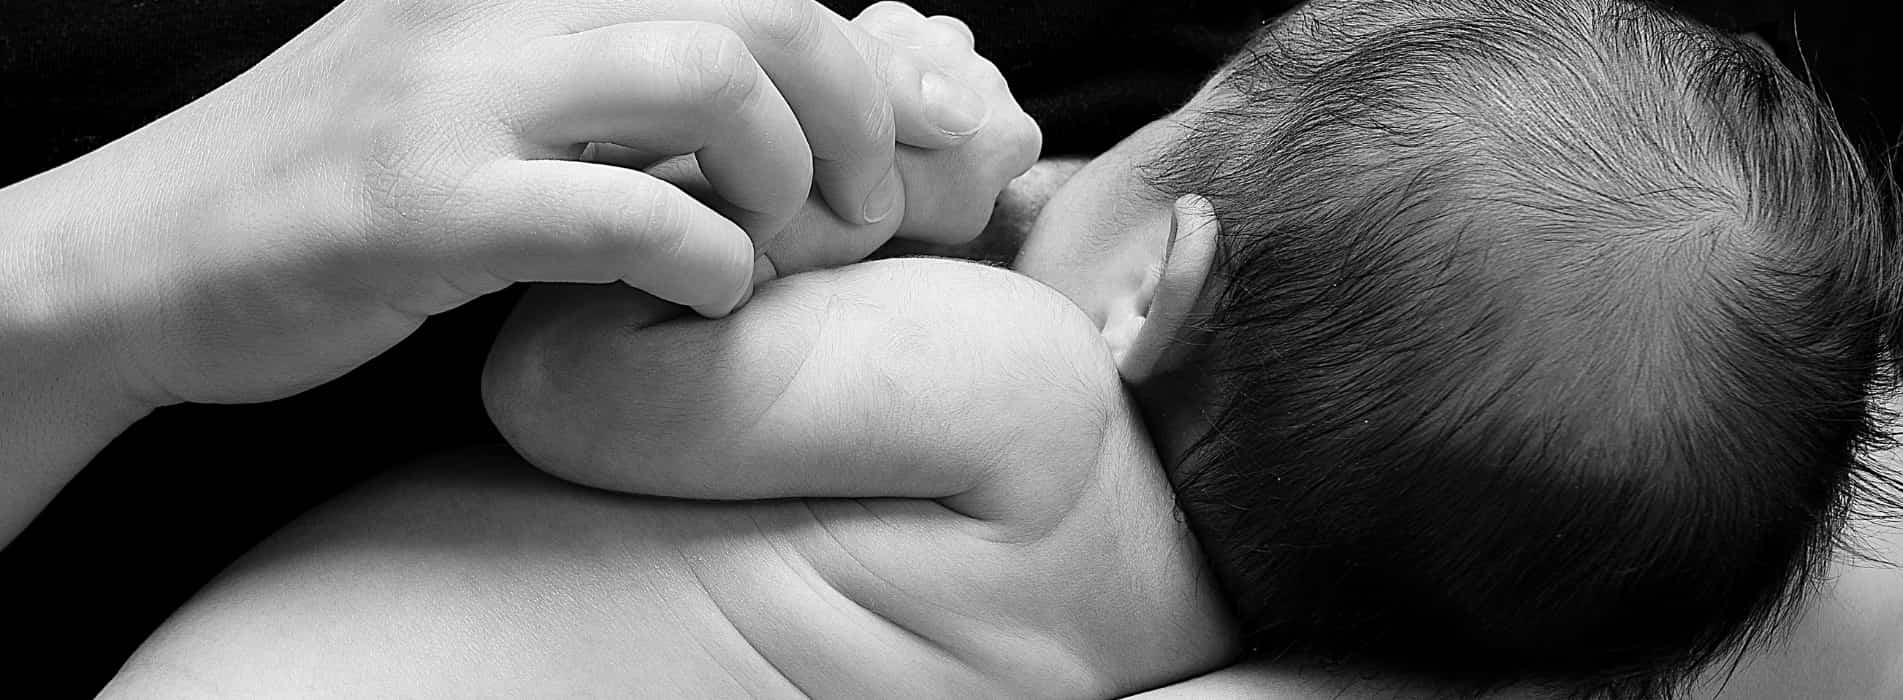 Breastfeeding mothers and lactating baby